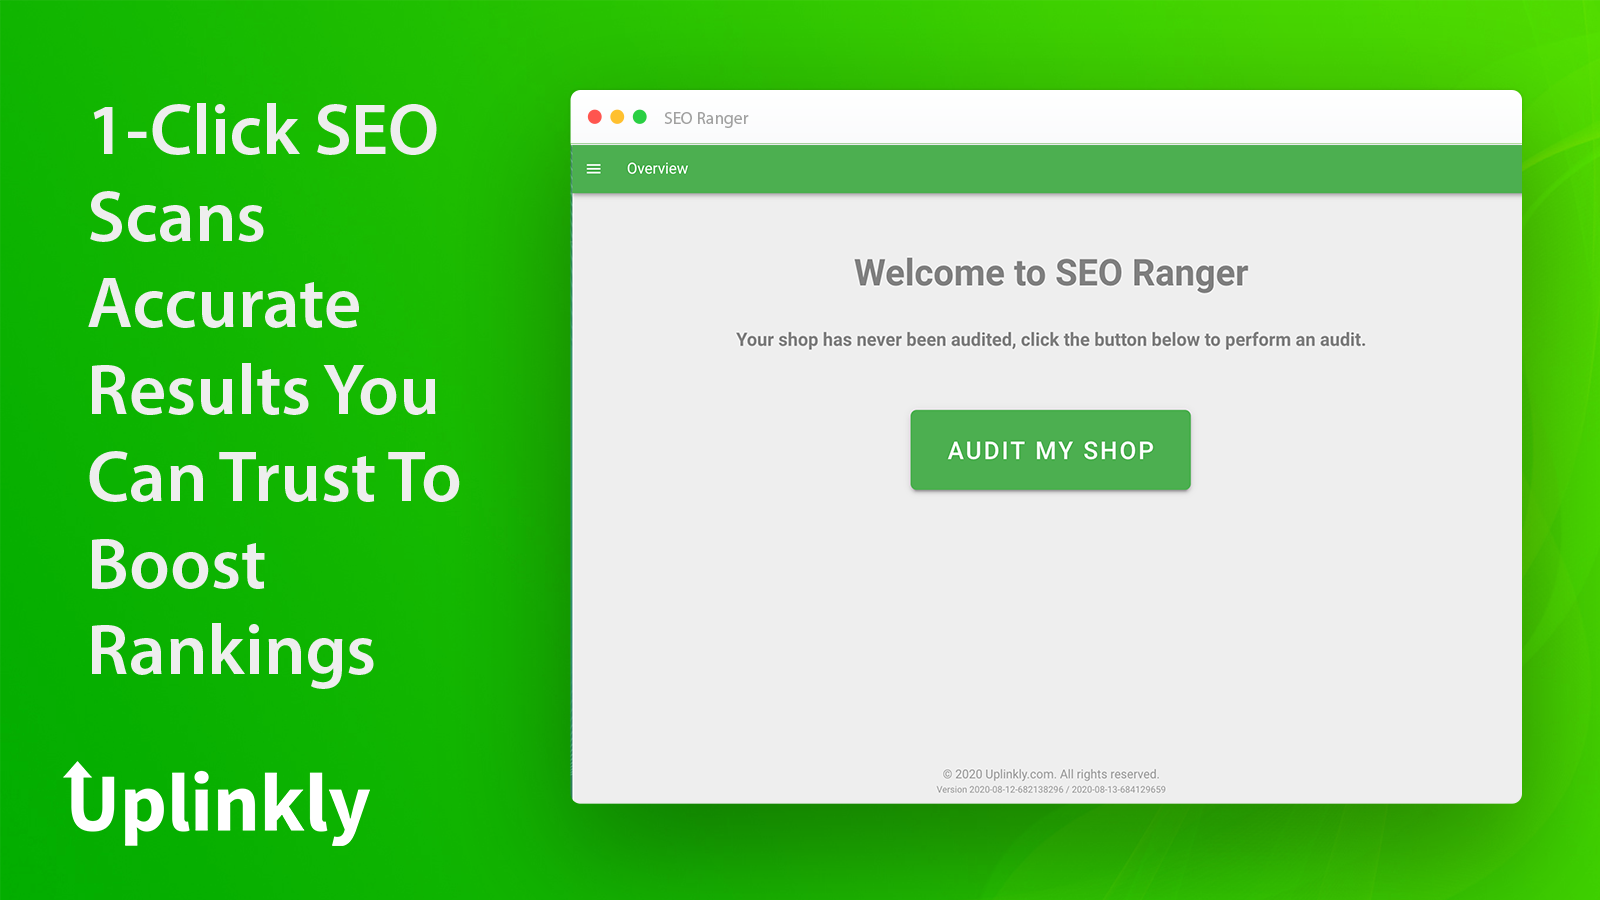 SEO Ranger Home Screen Simple 1-Click Audit Scans 